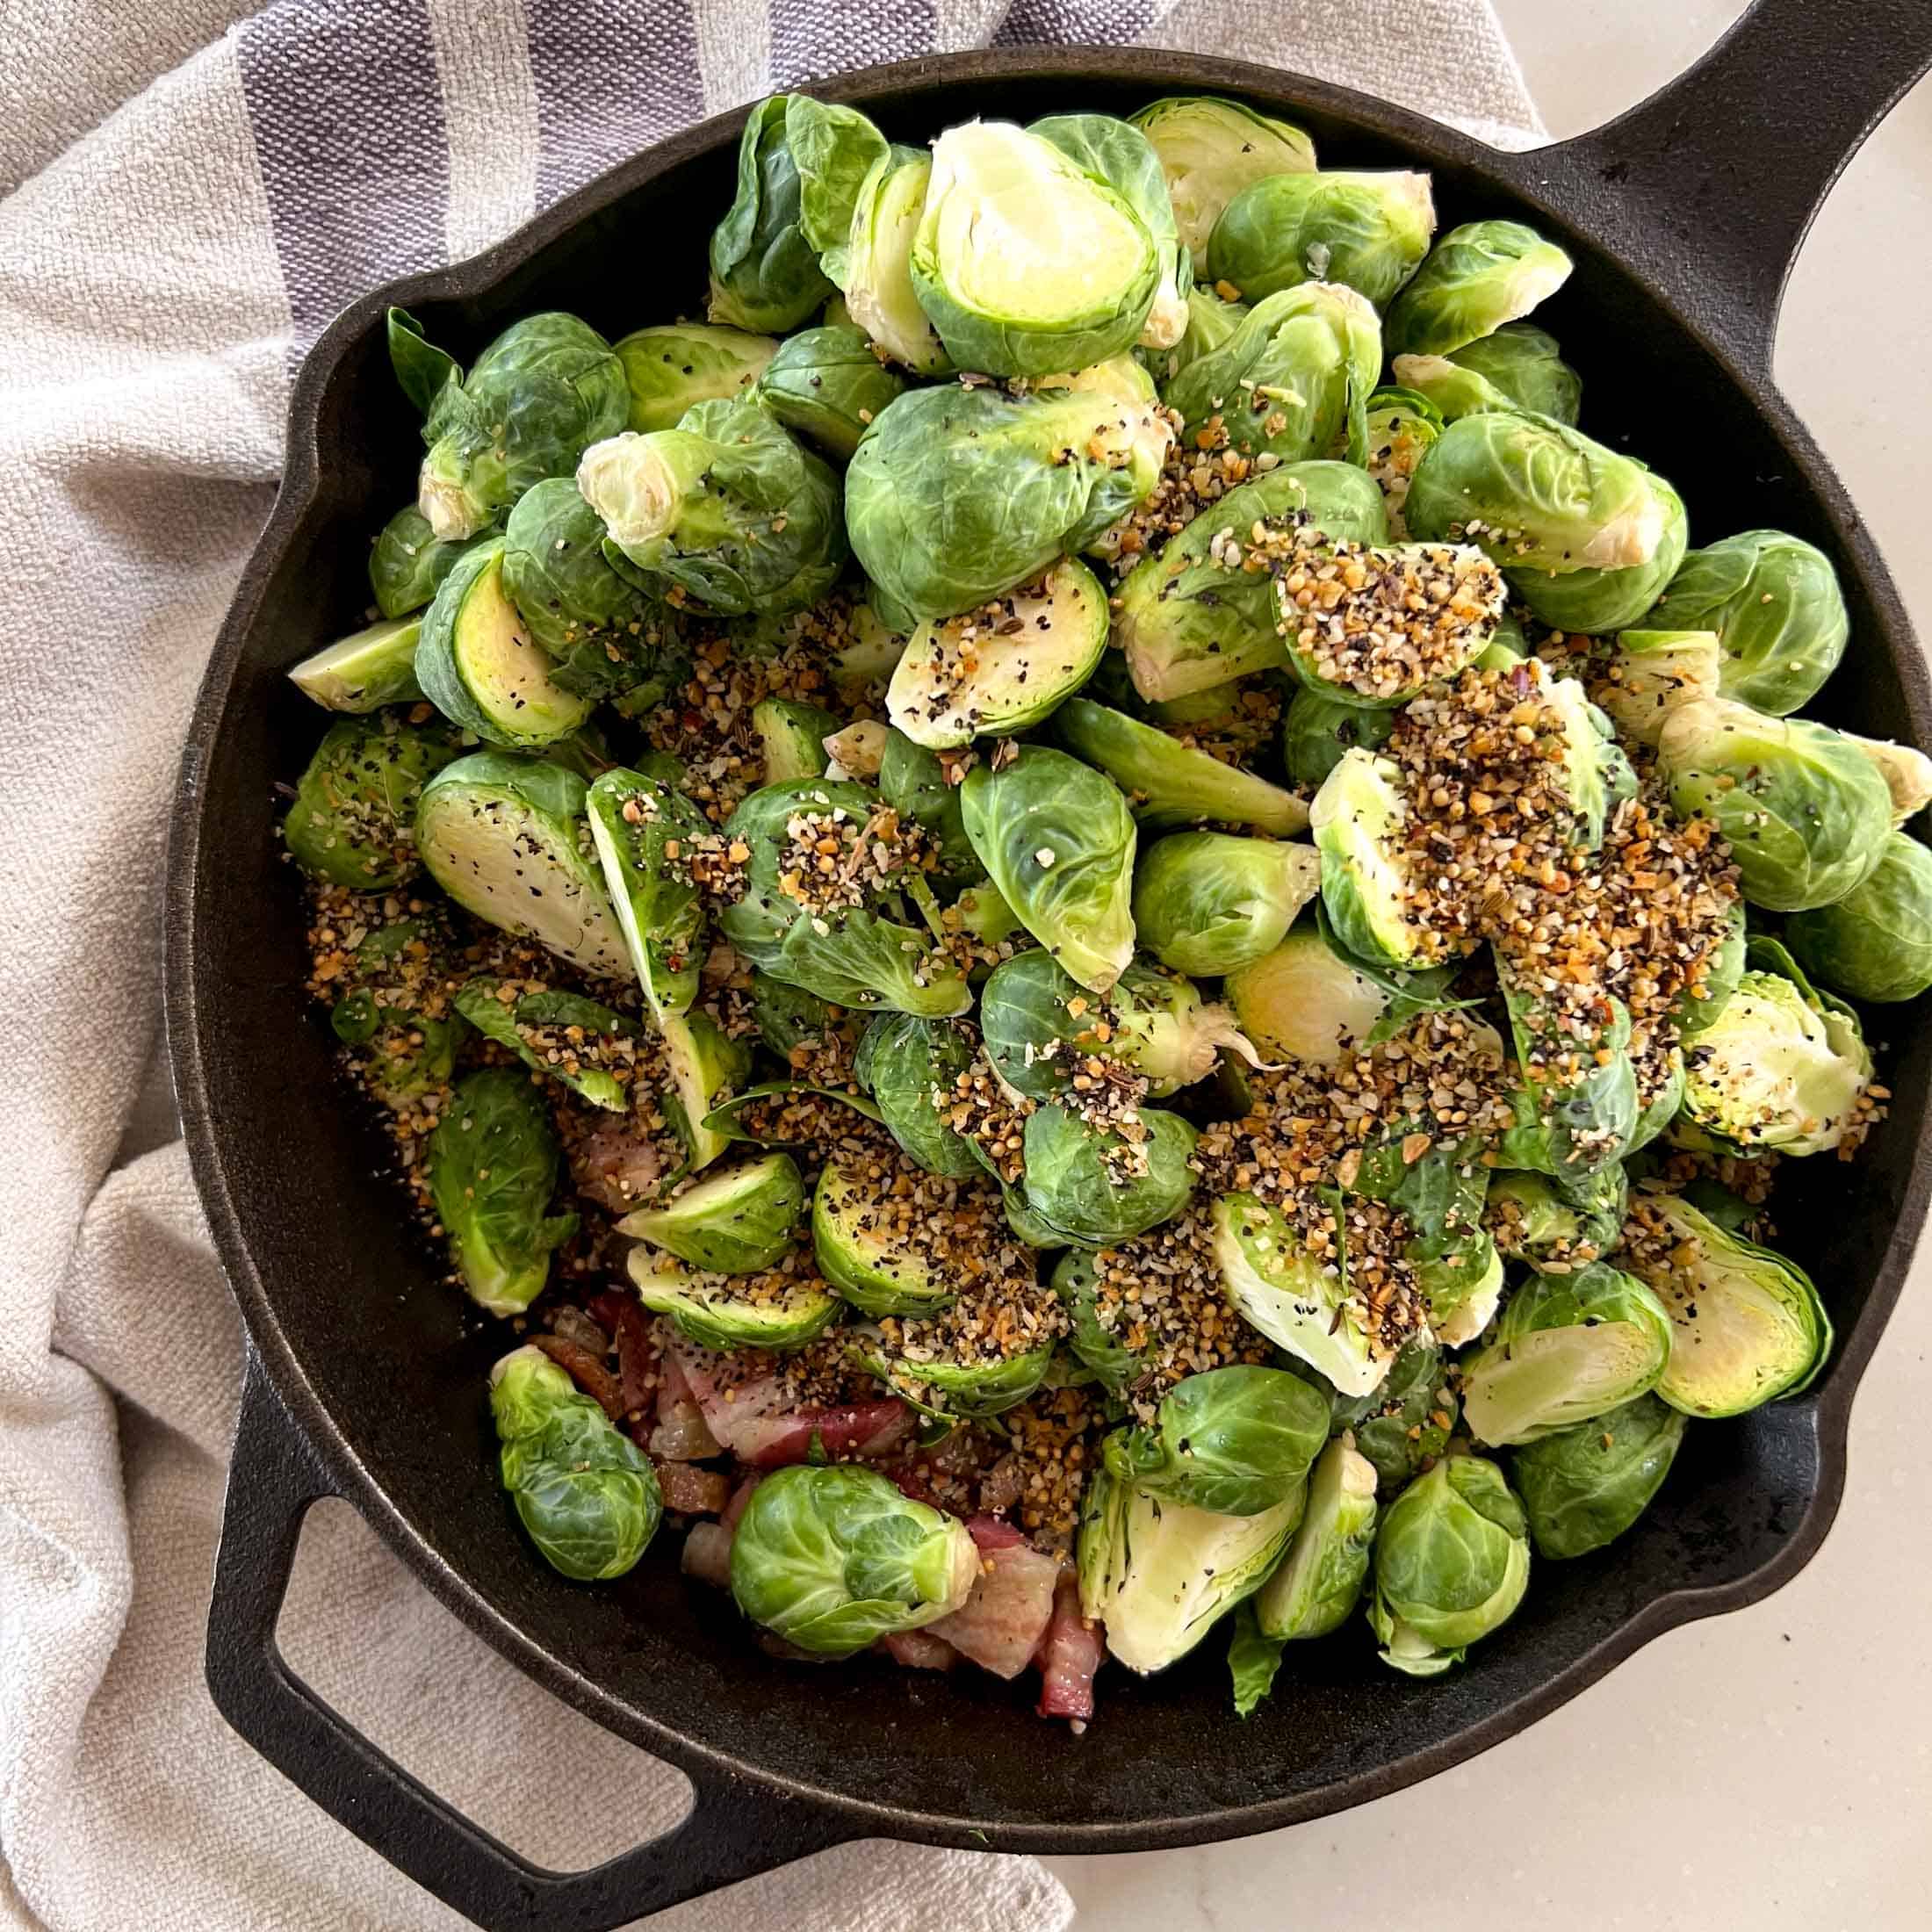 Montreal steak spice on top of raw brussels sprouts.